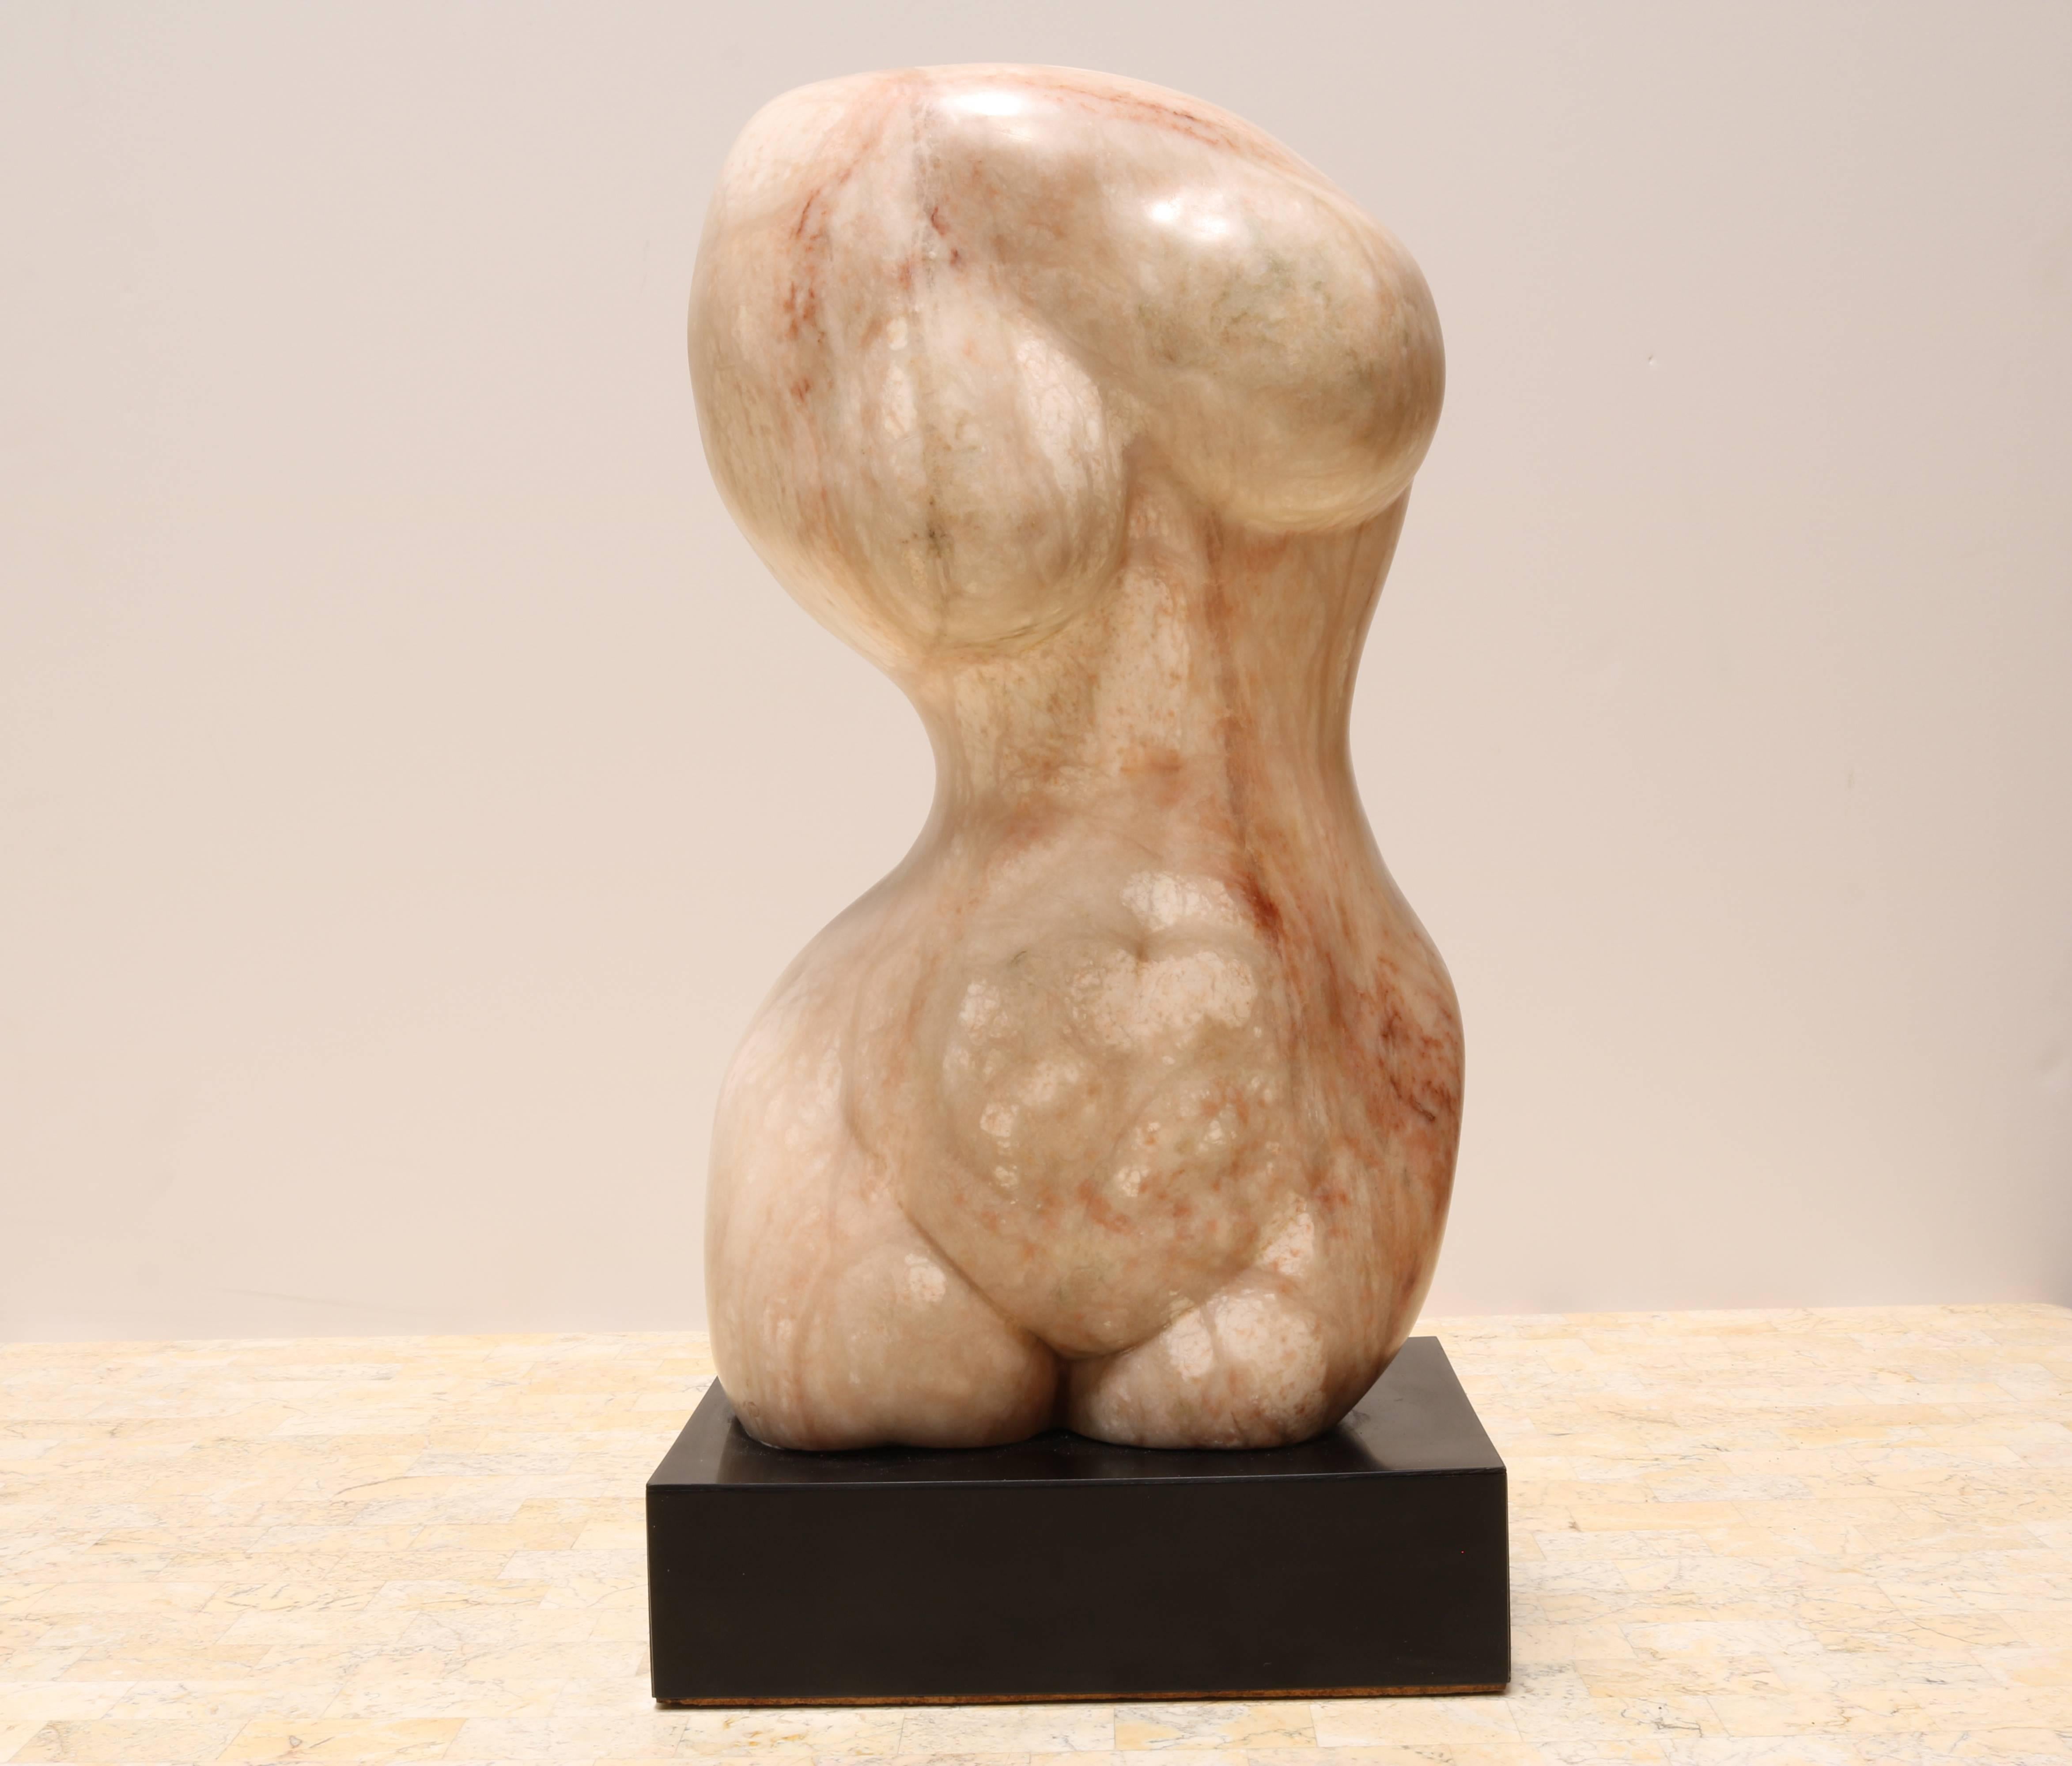 Exquisite female nude marble sculpture sits on a 2.25" H black base. Notice the artist’s masterful use of the marble's natural veins. Signed P. Haskamp.